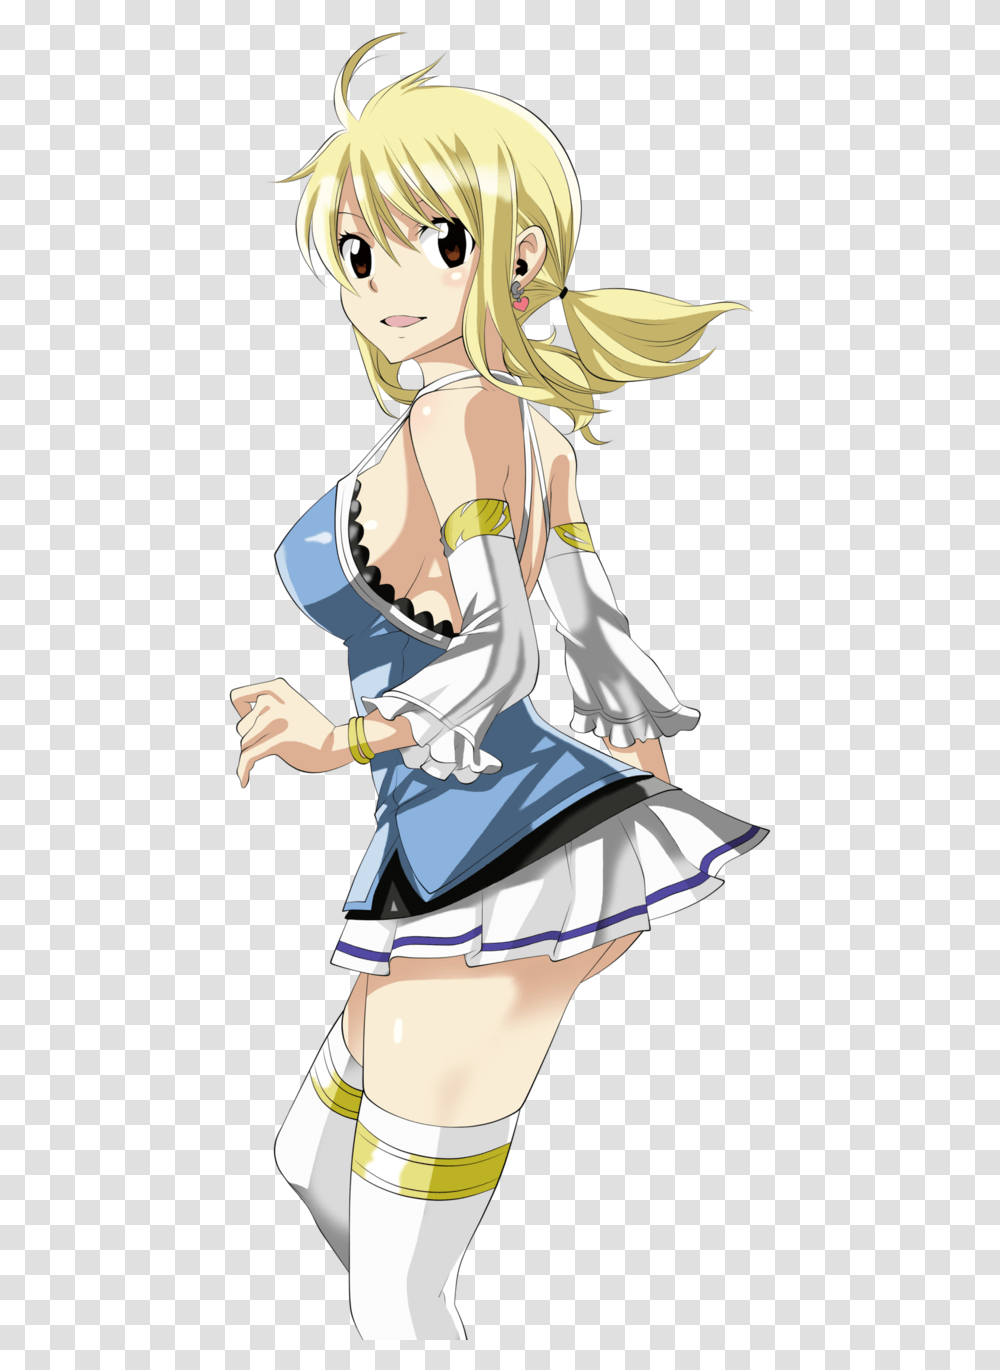 Fairy Tail Lucy Download Fairy Tail Natsu Et Lucy, Person, Human, Manga, Comics Transparent Png